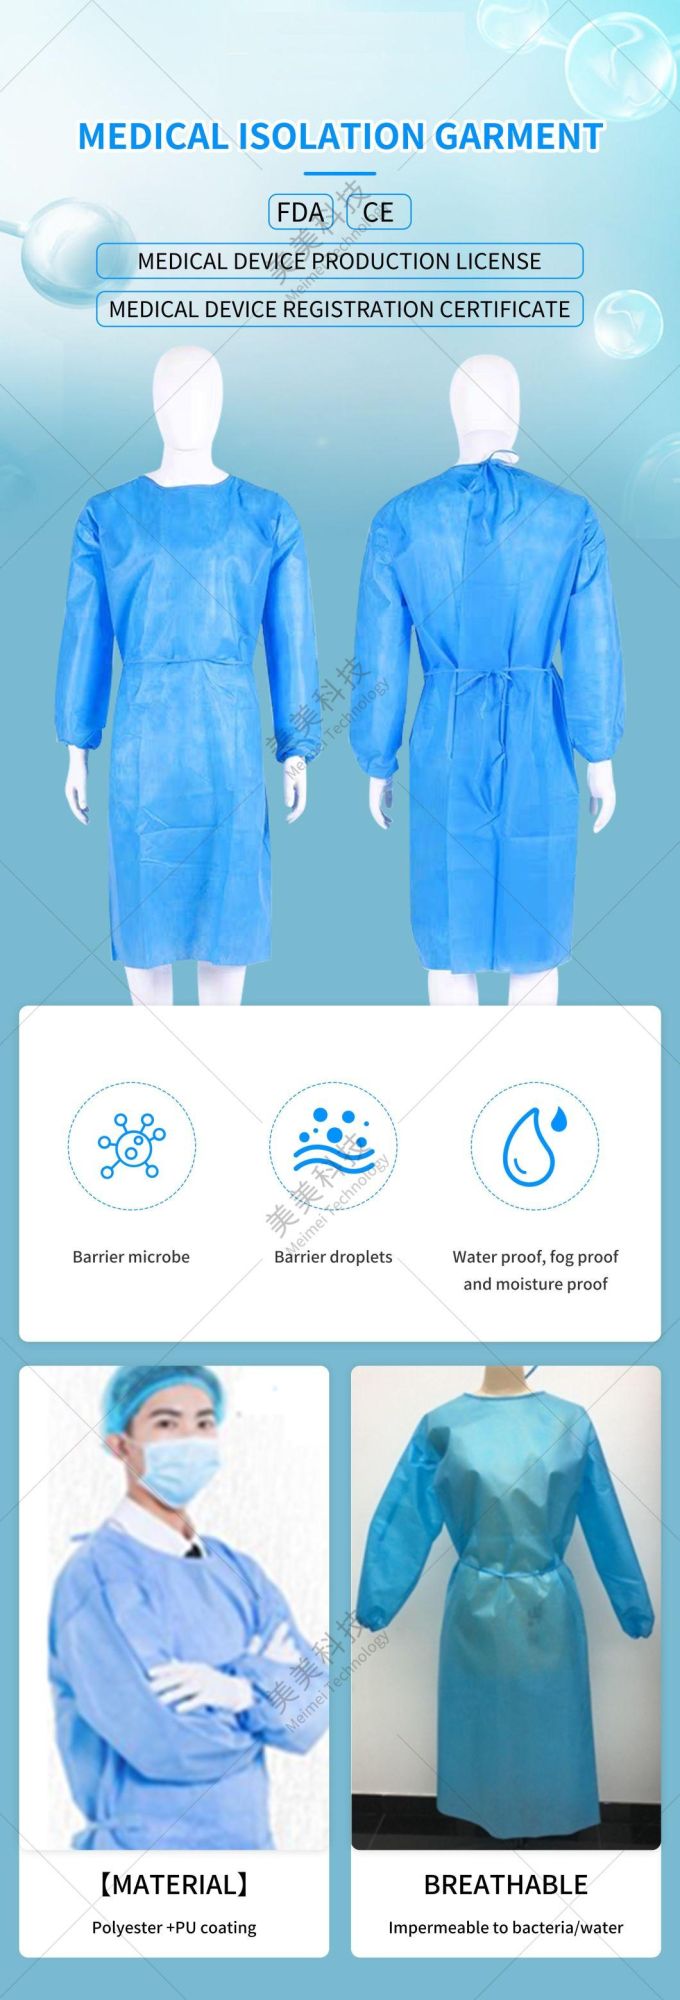 Isolation Garment Coverall Sterile Medical Hospital Surgical Gown En: 14126 Gown Antifluid Clothes PPE Medical Supply